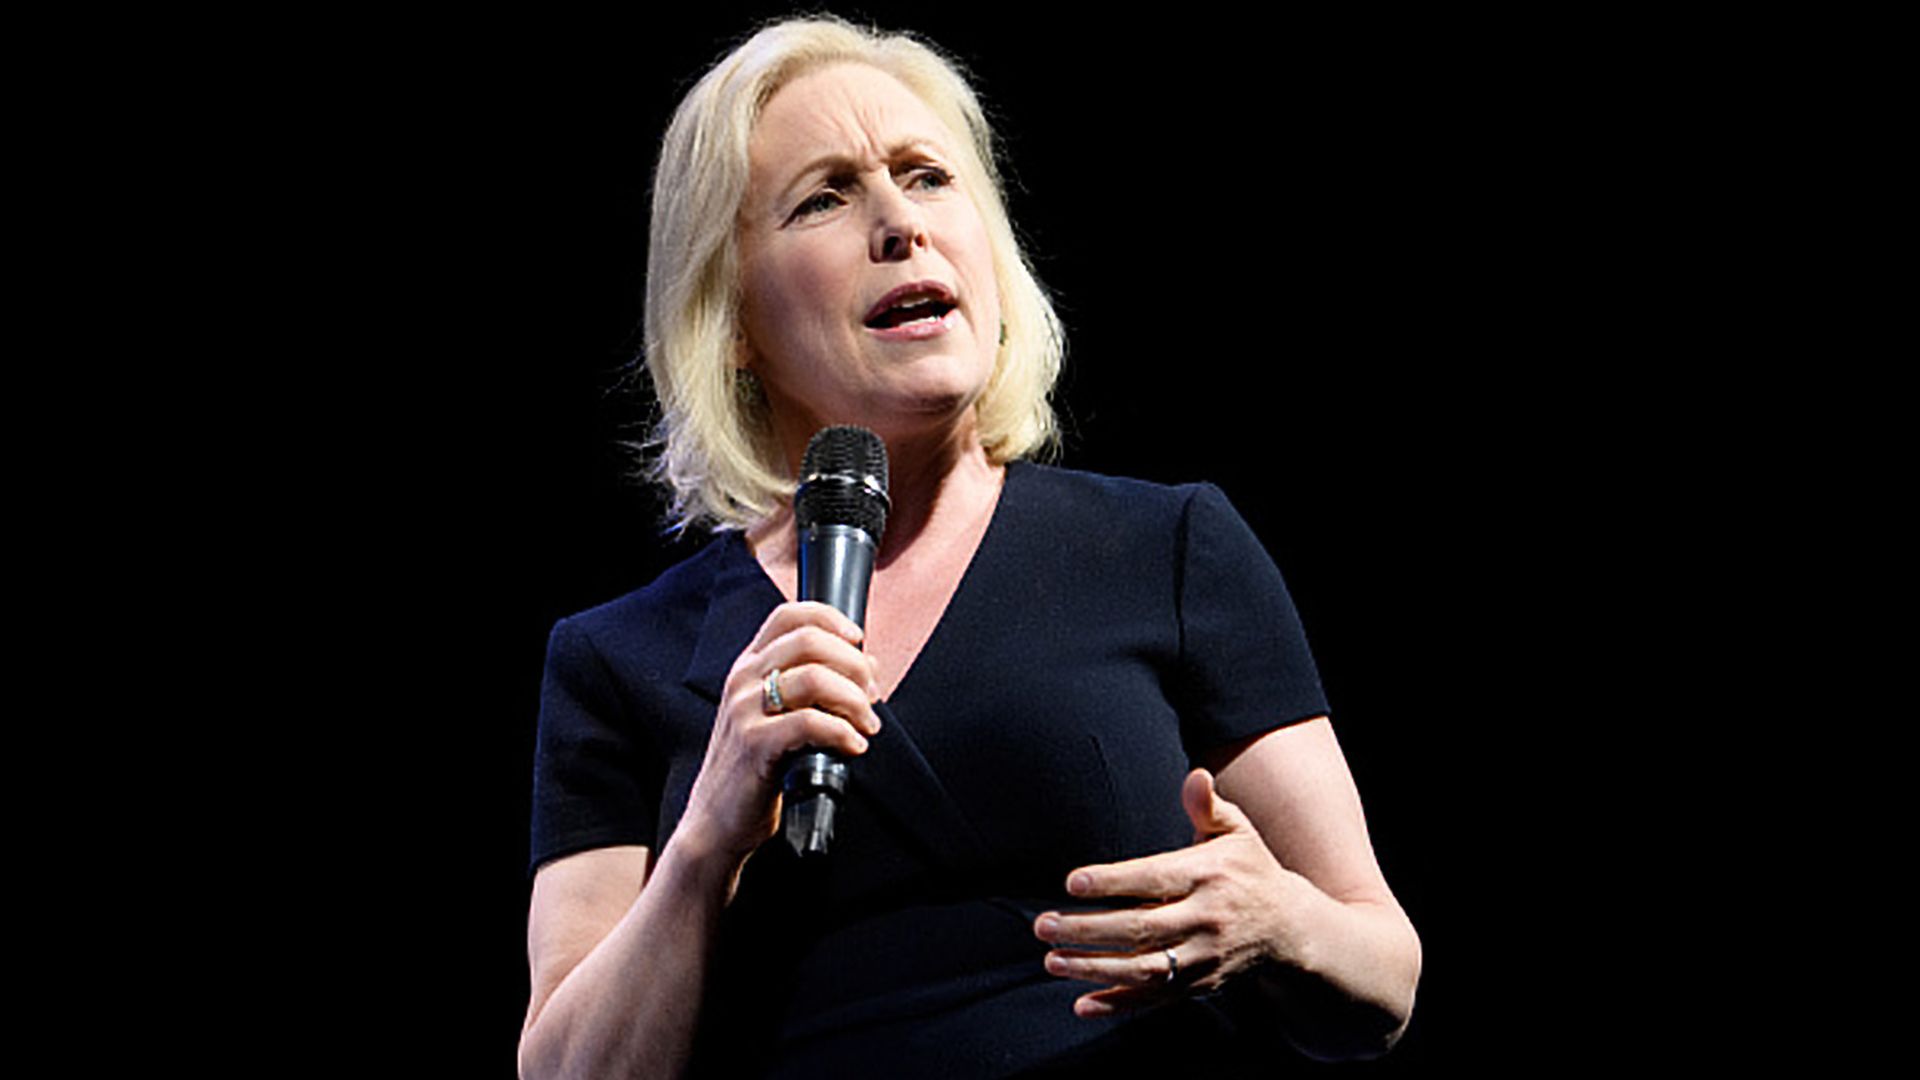 Sen. Kirsten Gillibrand says her views have changed on immigration.